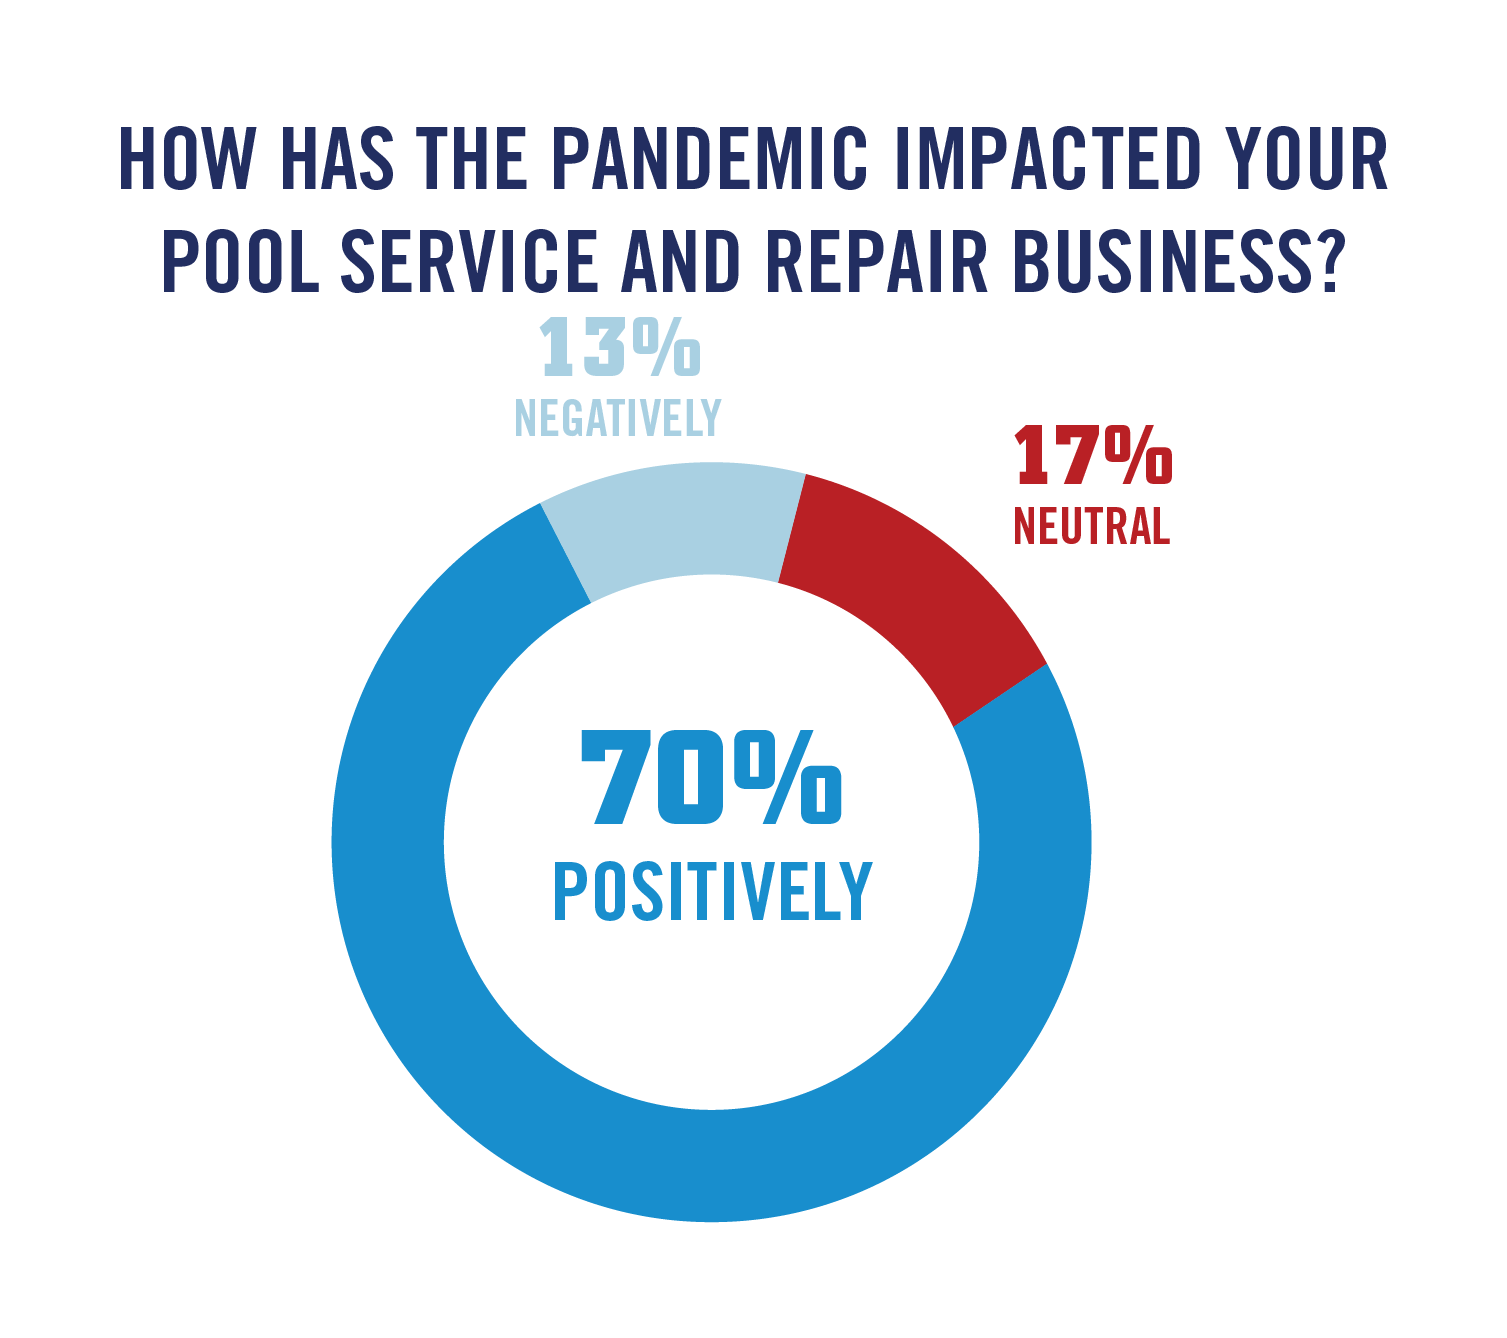 Pie chart showing 70% of pool service businesses saw positive impact from pandemic